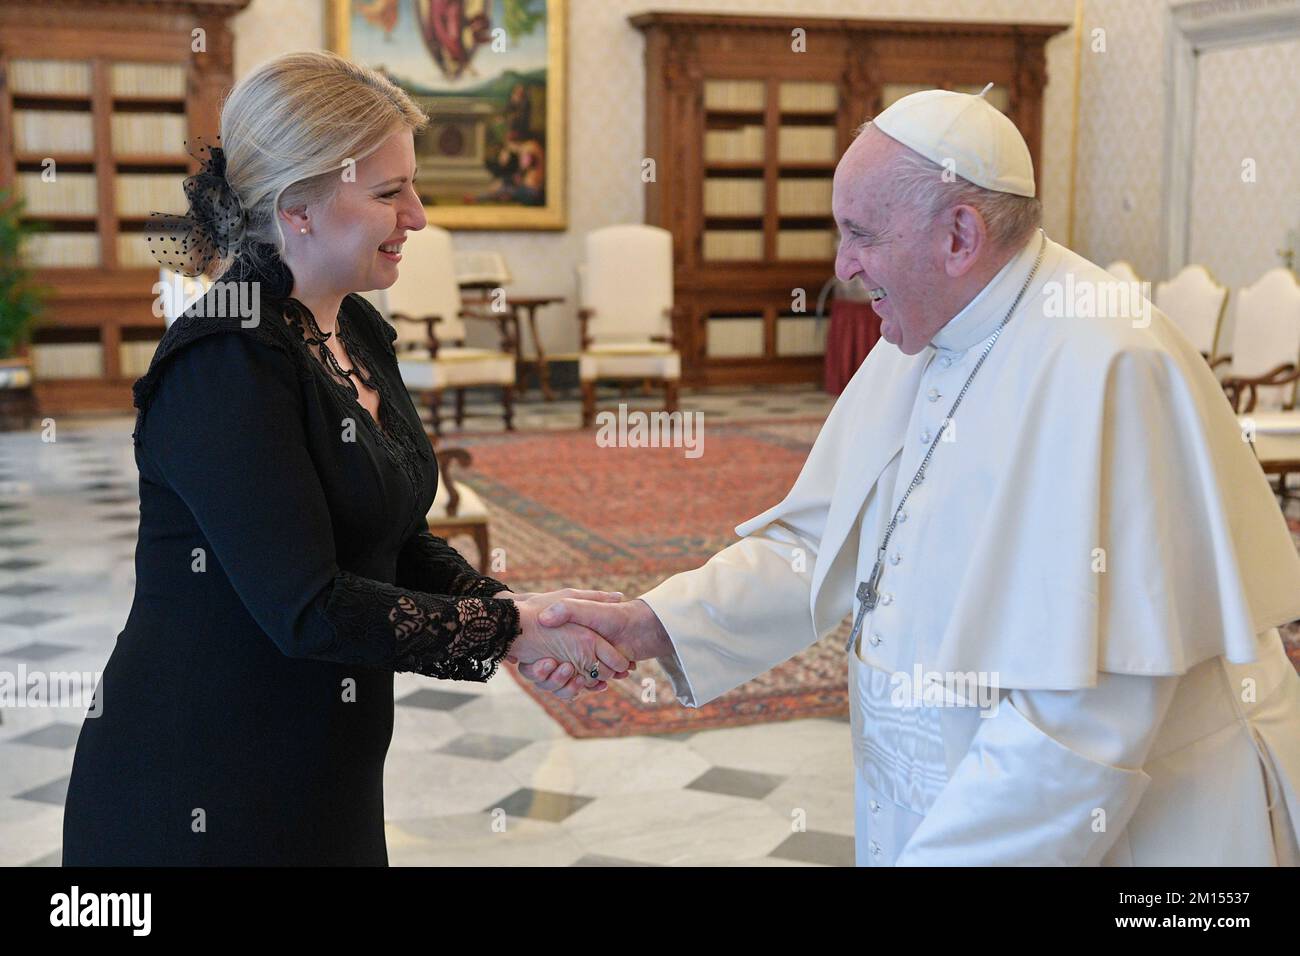 Vatican. 10th Dec, 2022. ITALY-VATICAN-REL DECEMBER 10, 2022 Pope Francis receives in private audience at the Vatican H.E. Mrs. Zuzana Caputova, President of the Slovak Republic H.E. Mrs. Zuzana Caputova, President of the Slovak RepublicITALIA-VATICANO-REL 10 DICEMBRE 2022 Papa Francesco riceve in udienza privata in Vaticano S.E. La Signora Zuzana Caputova, Presidente della Repubblica Slovacca S.E. La Signora Zuzana Caputova, Presidente della Repubblica Slovacca Photograph by Vatican Mediia/Catholic Press Photo RESTRICTED TO EDITORIAL USE - NO MARKETING - NO ADVERTISING CAMPAIGNS. Credit: Inde Stock Photo